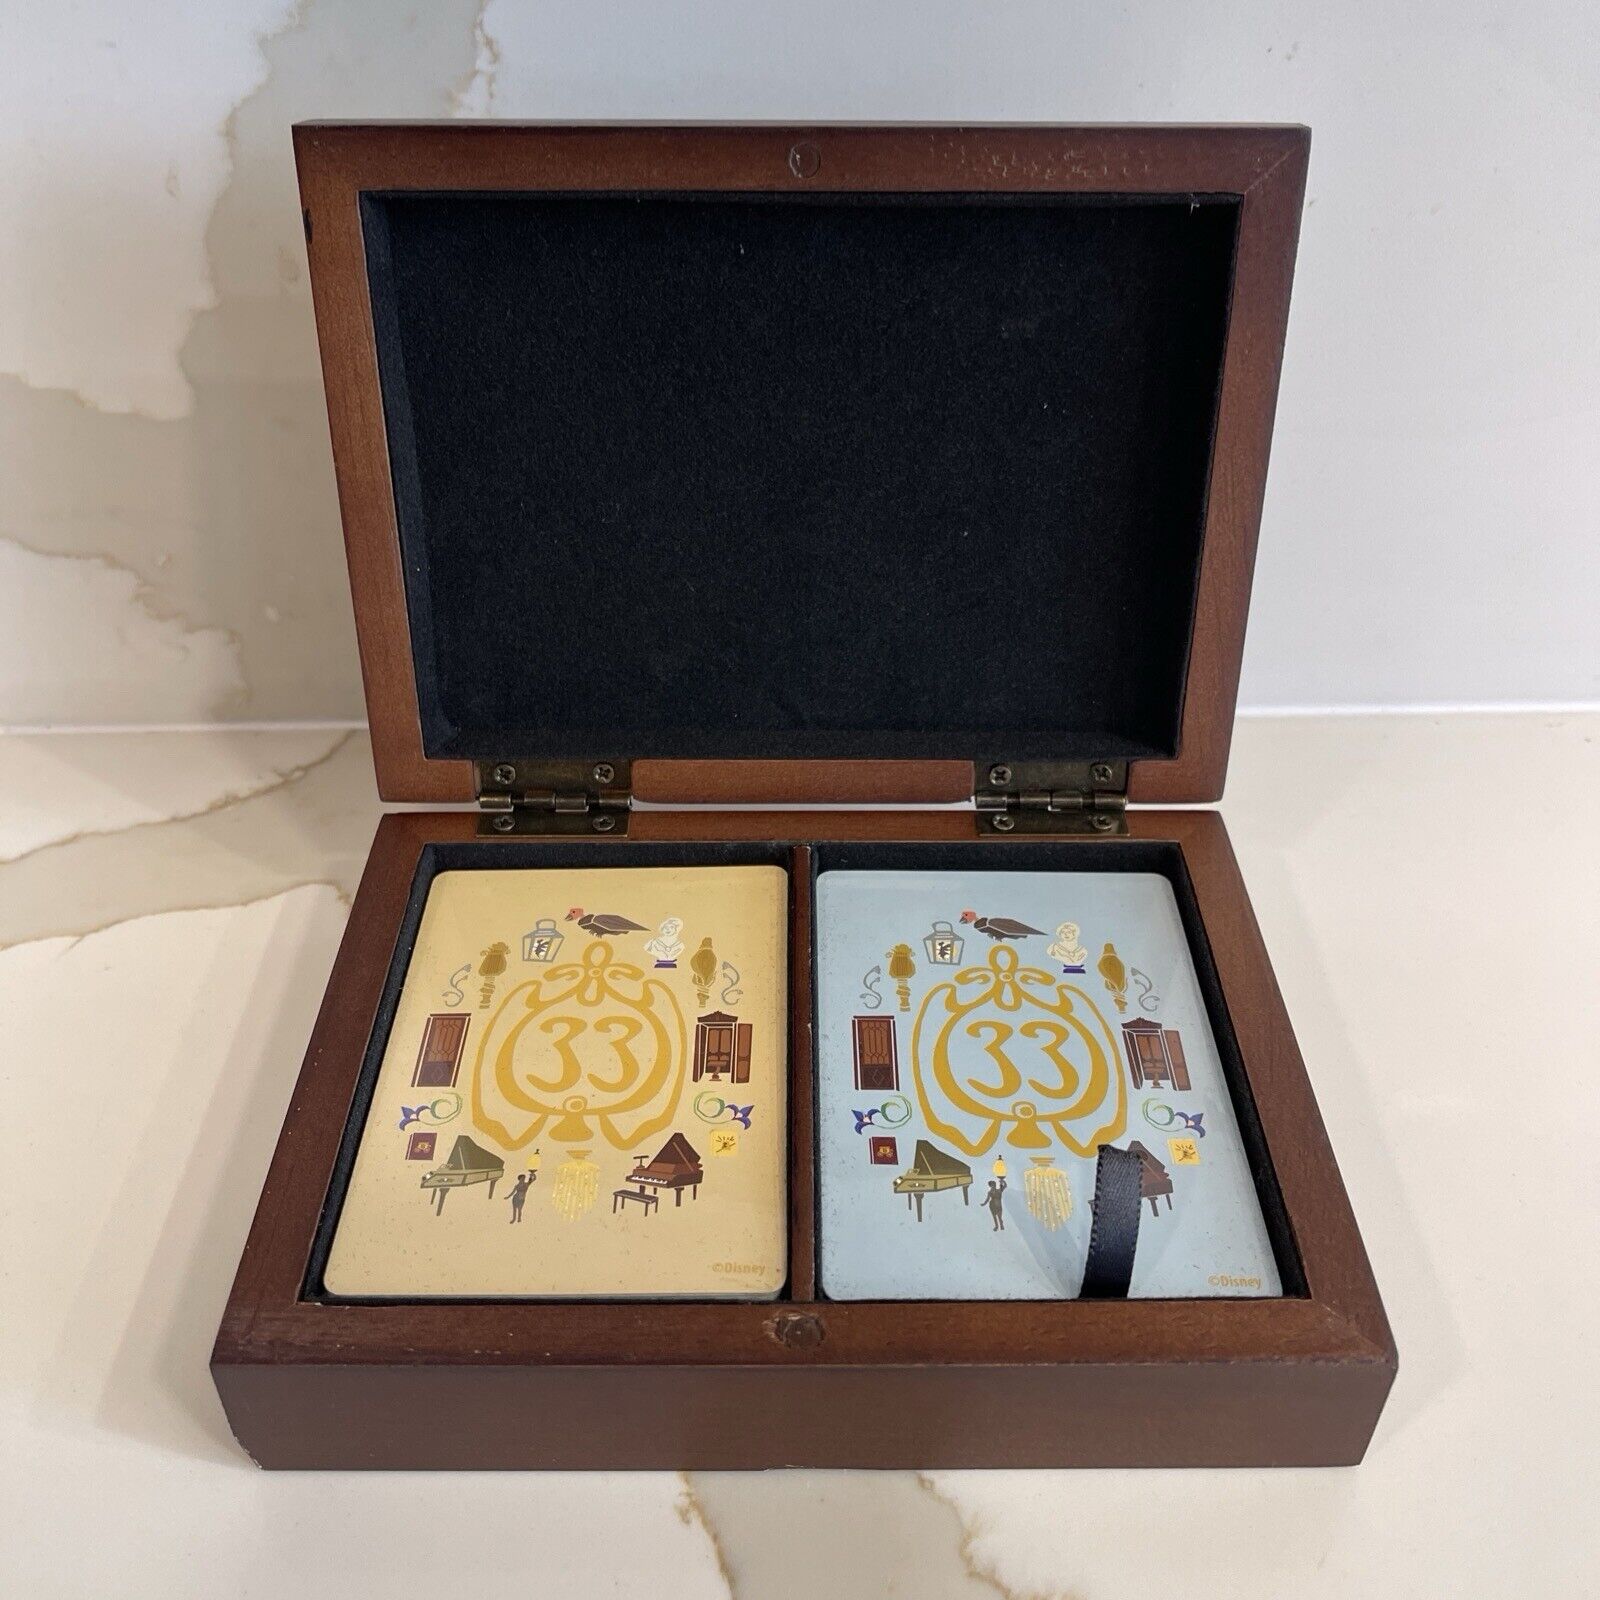 New Club 33 Disneyland Wooden Box with 2 sets of Playing Cards in Wrapper